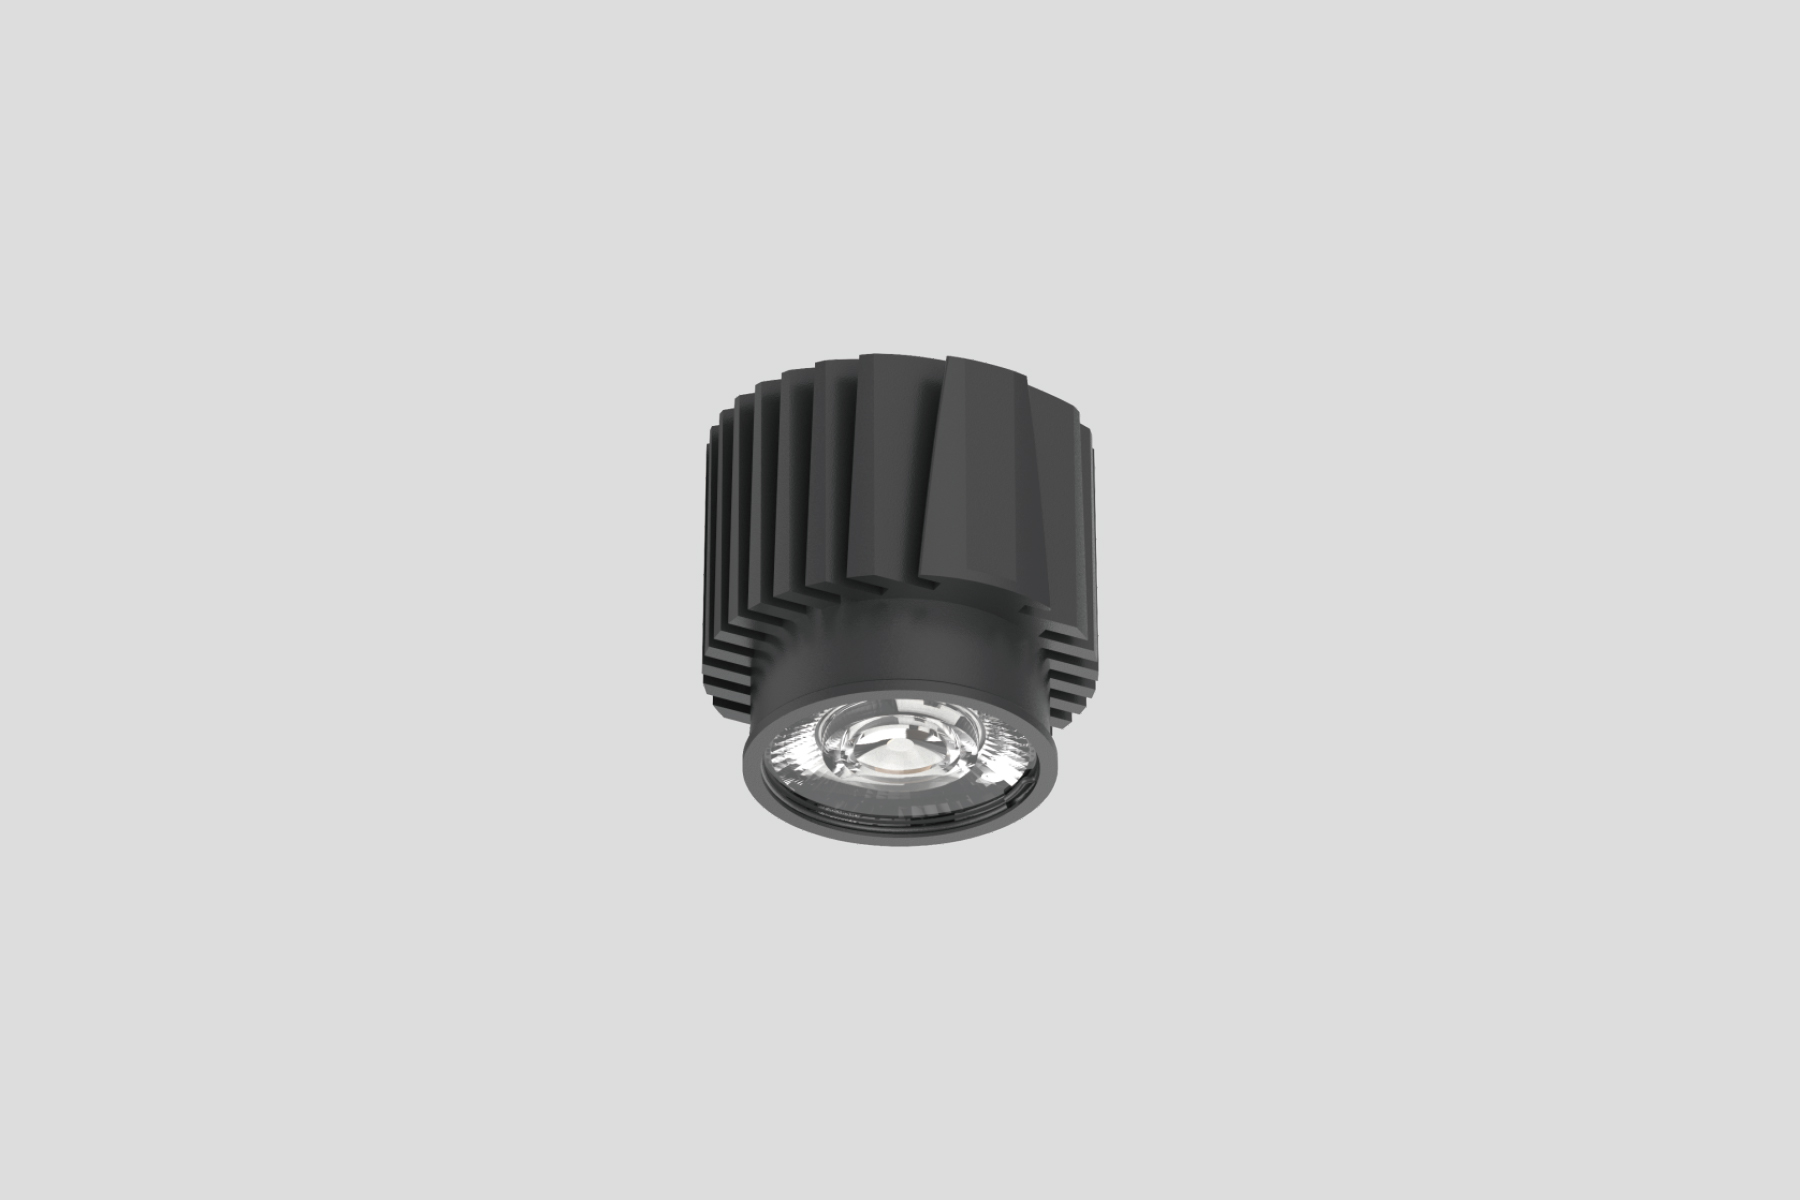 Residential Recessed Downlight - Vtrim Series-compatible module